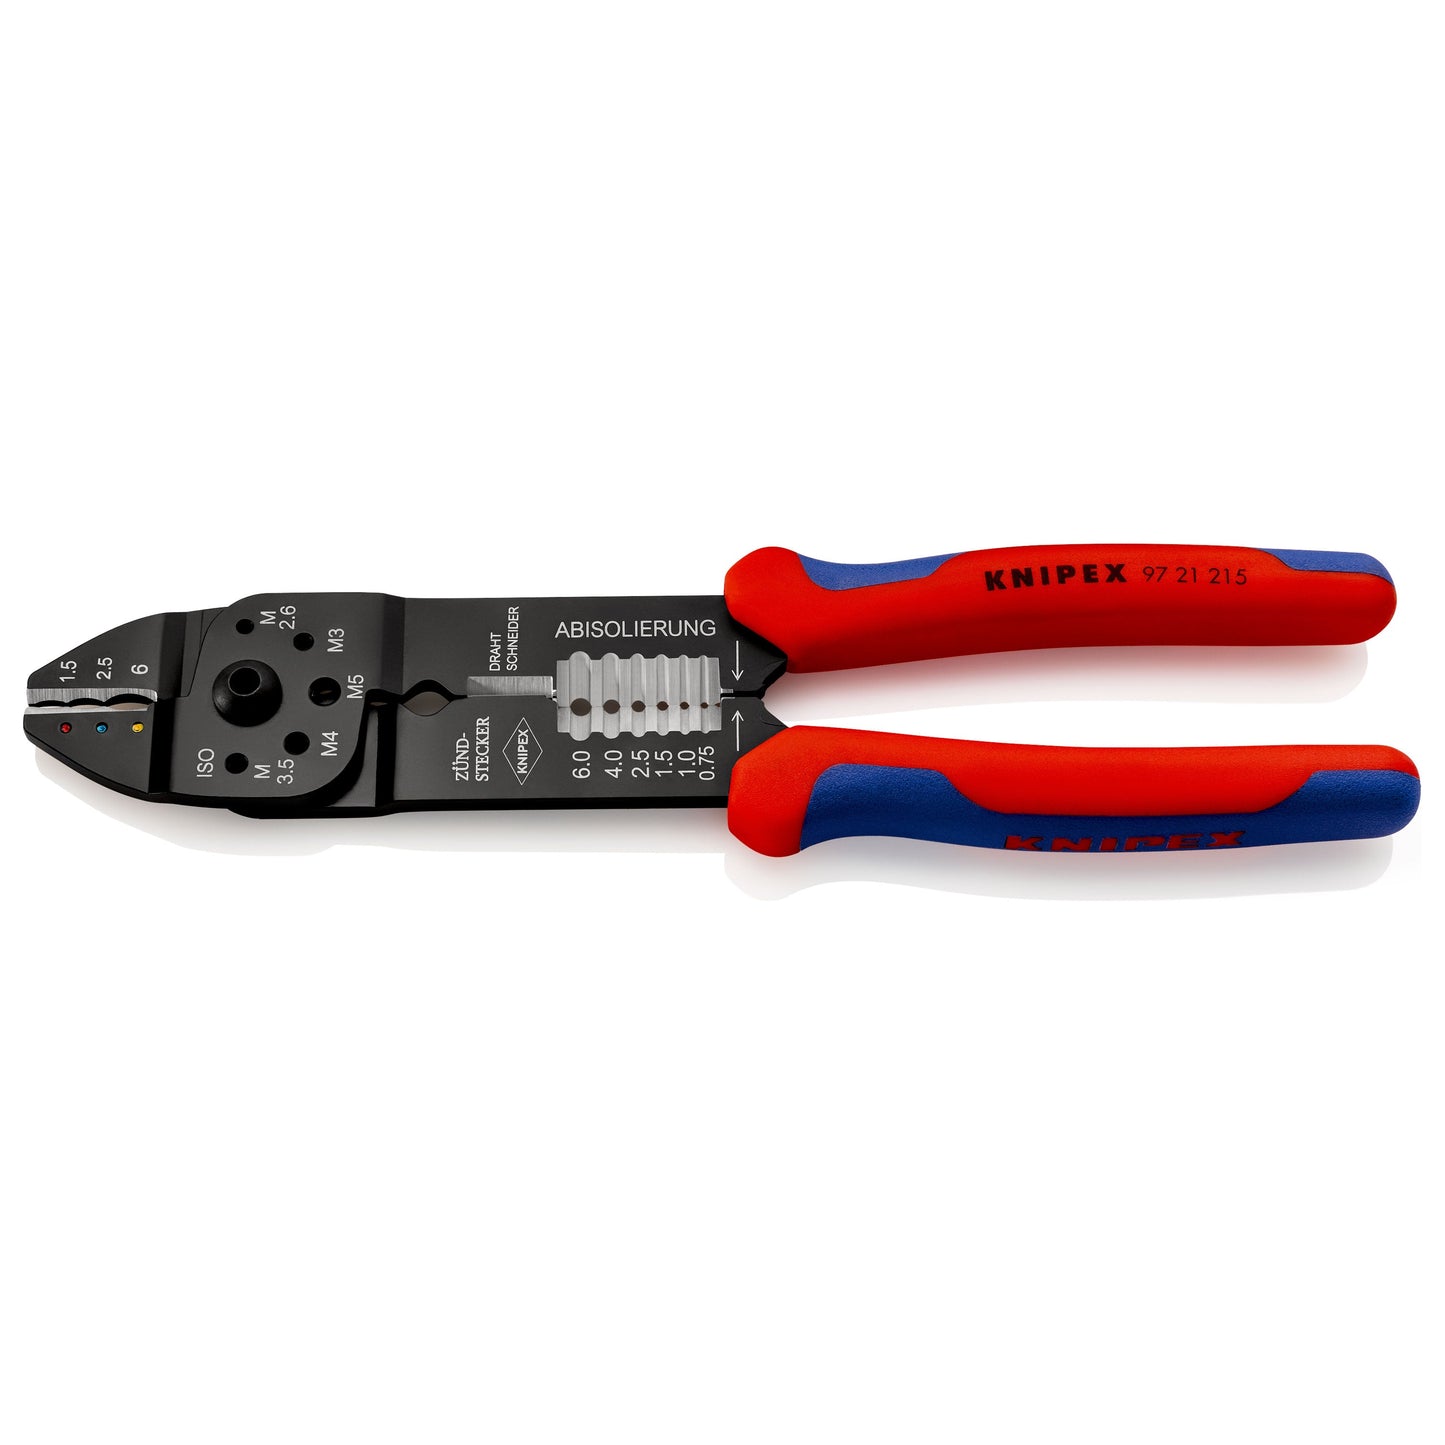 Knipex 97 21 215 - Terminal crimping pliers 230 mm with two-component handles